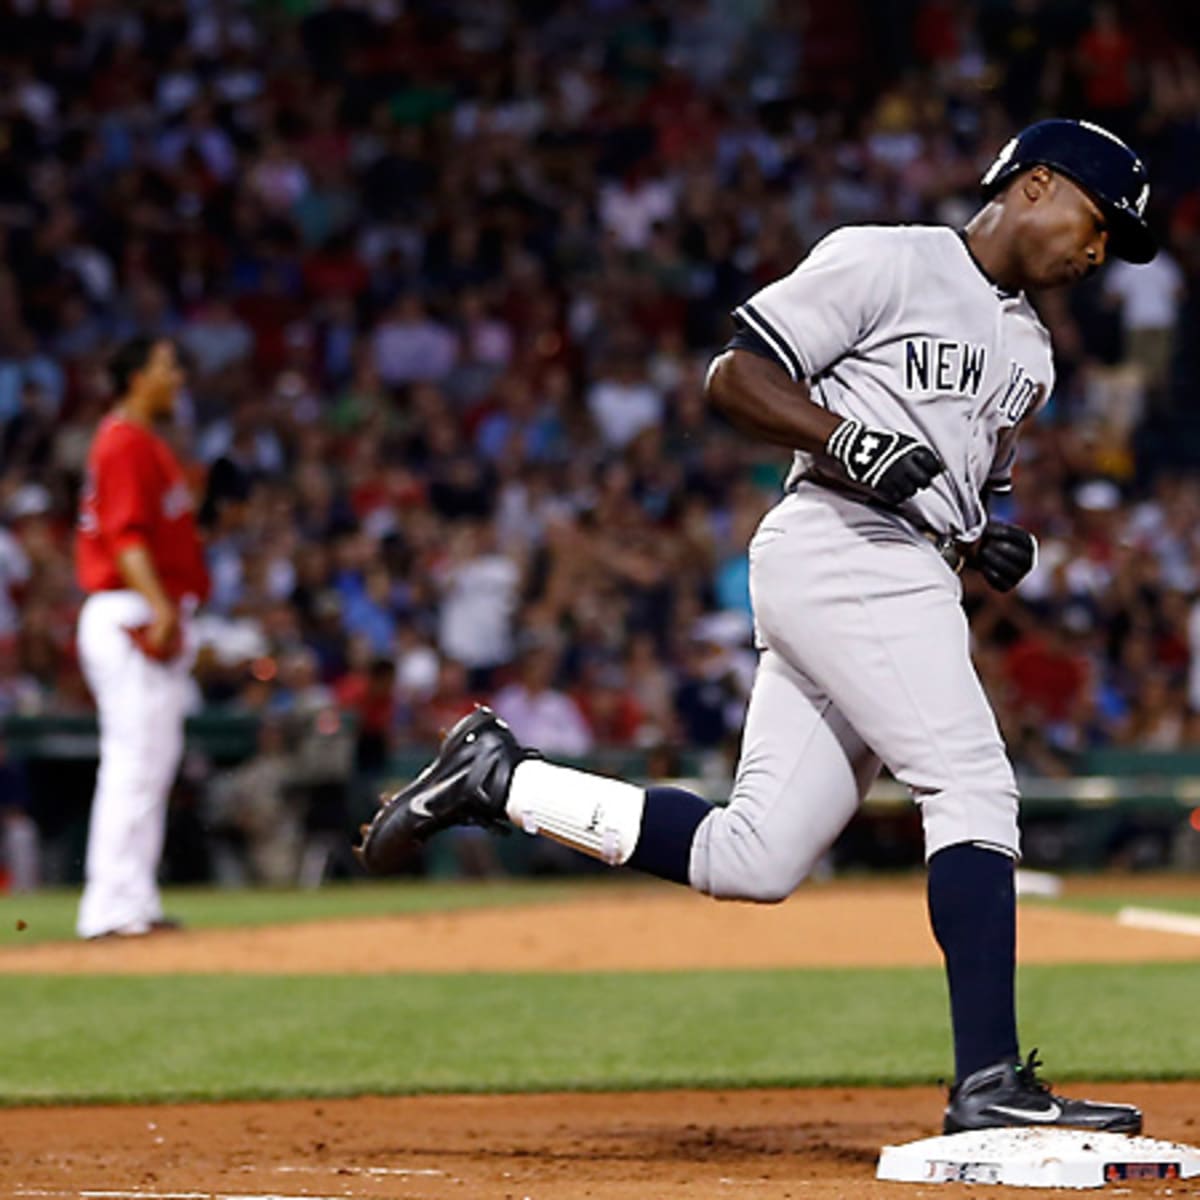 He's Arrived For the Yankees' Alfonso Soriano it's been a breakout